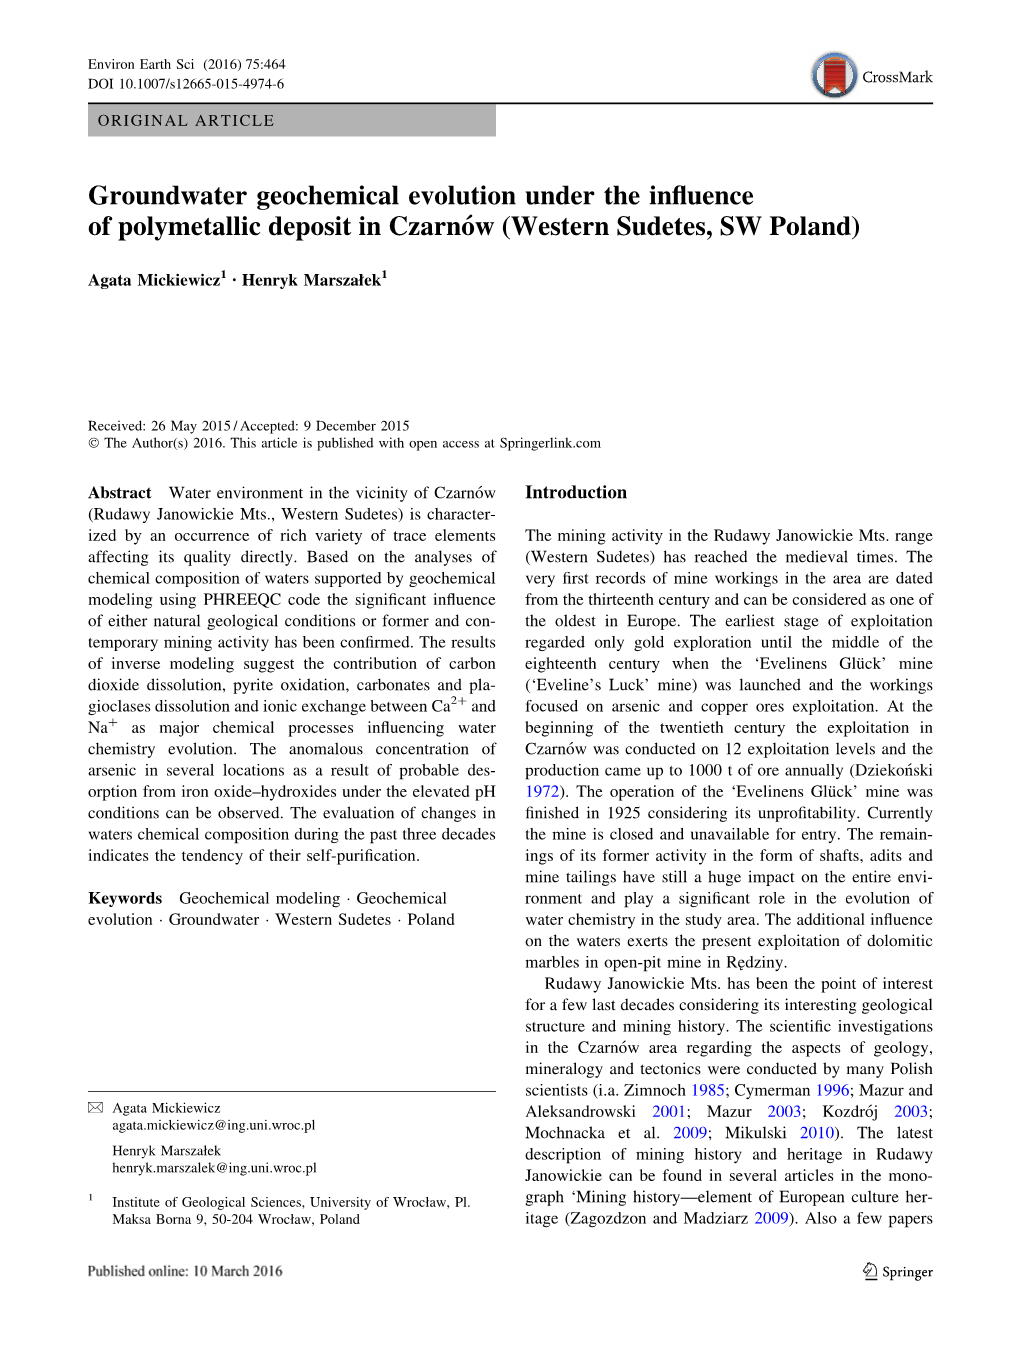 Groundwater Geochemical Evolution Under the Influence